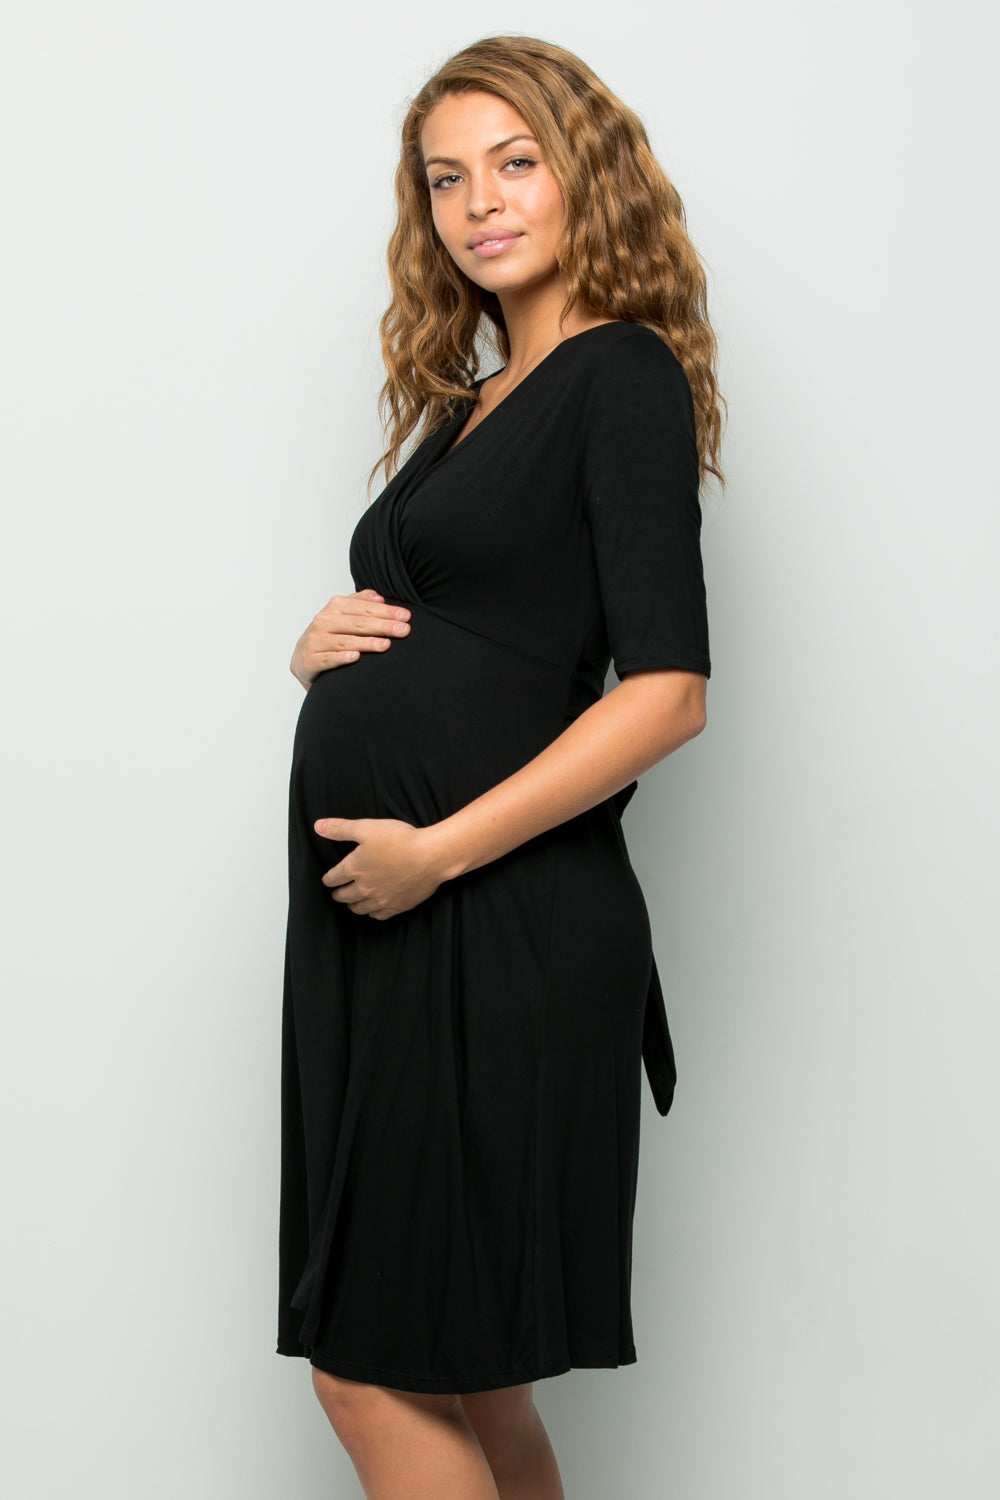 maternity pregnancy baby shower fit flare short sleeve round neck midi summer cocktail bodycon dress